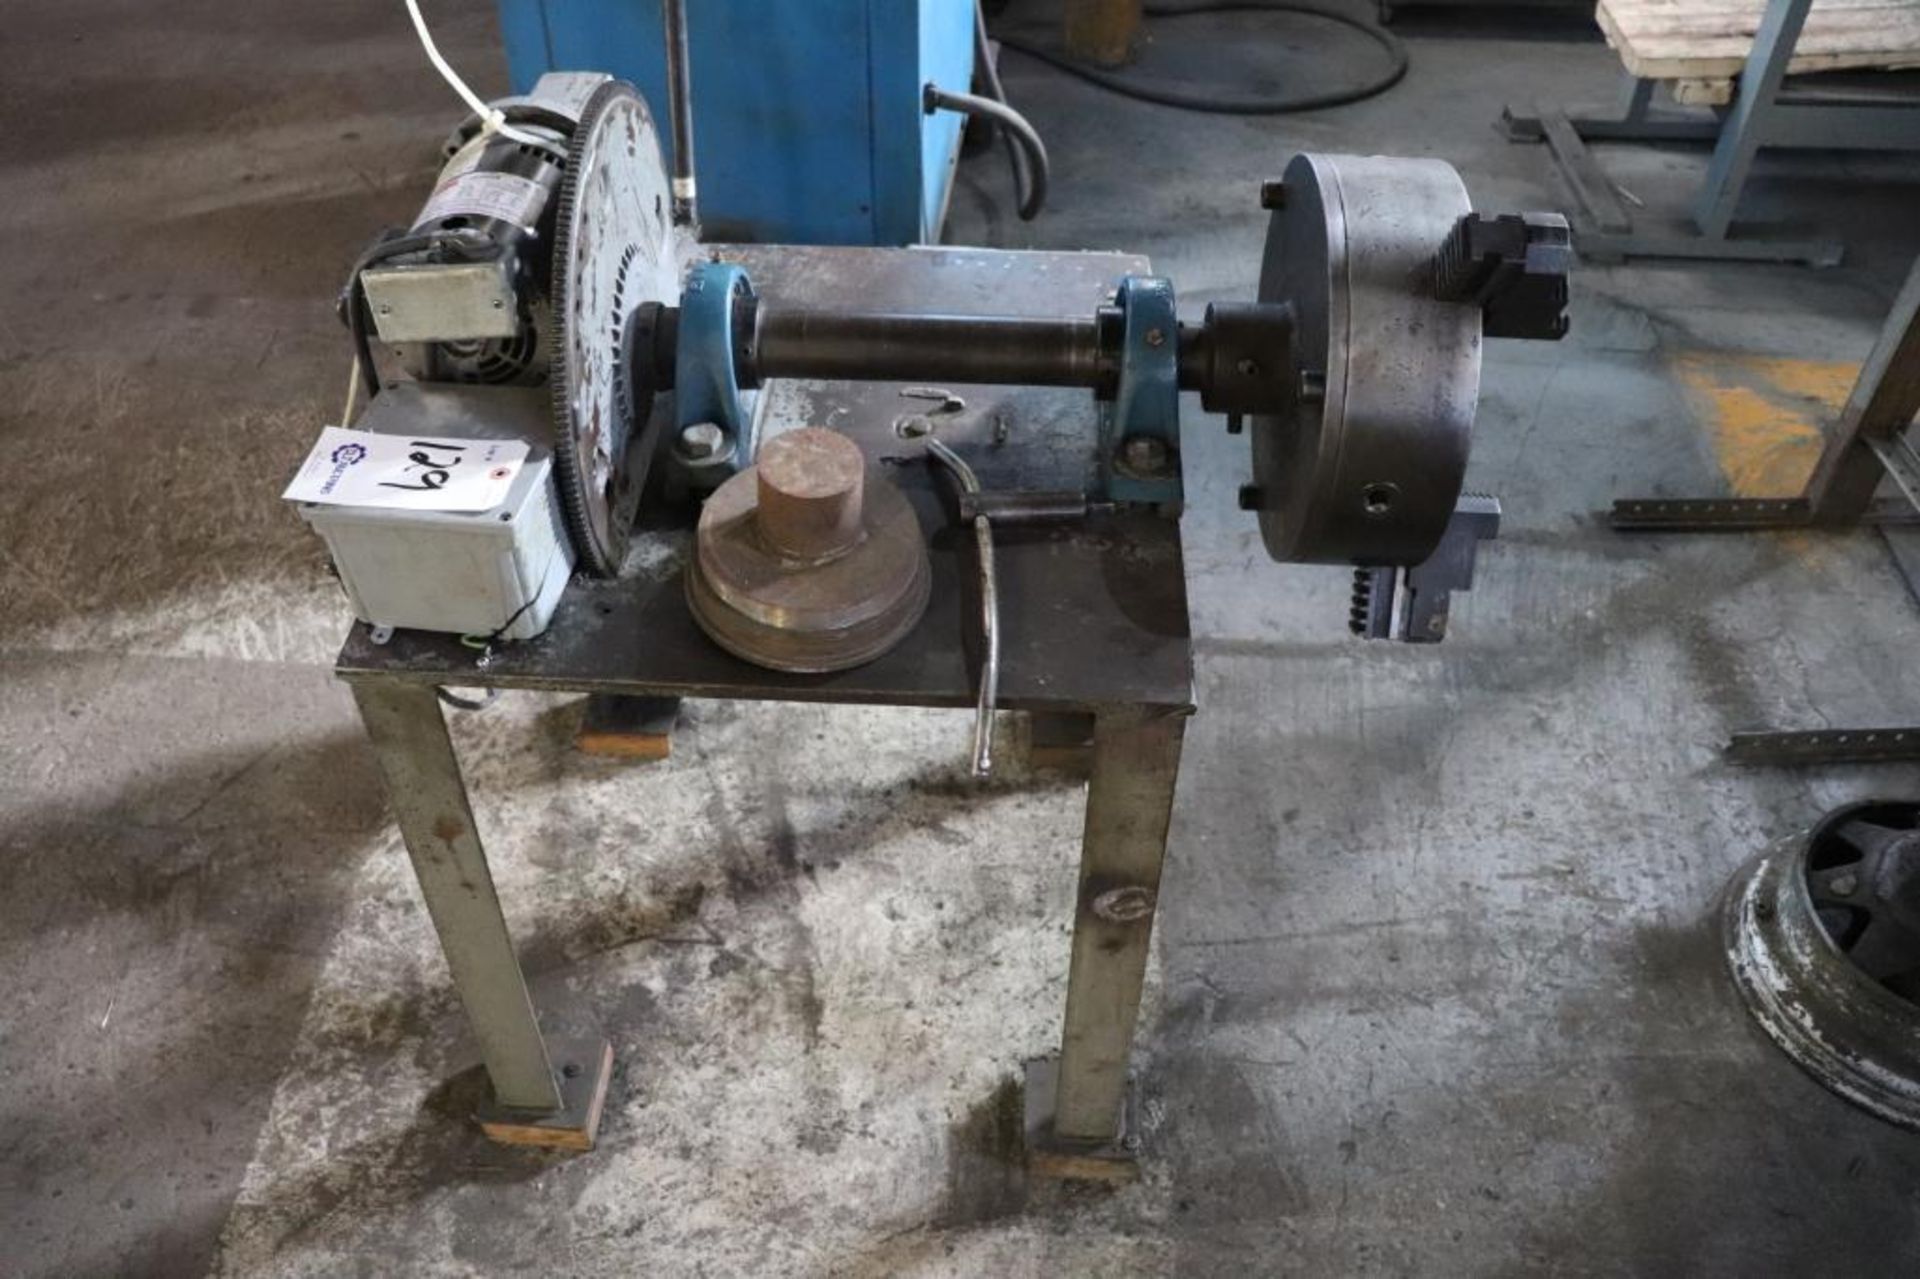 Welding positioner w/ lot 130 stock stand